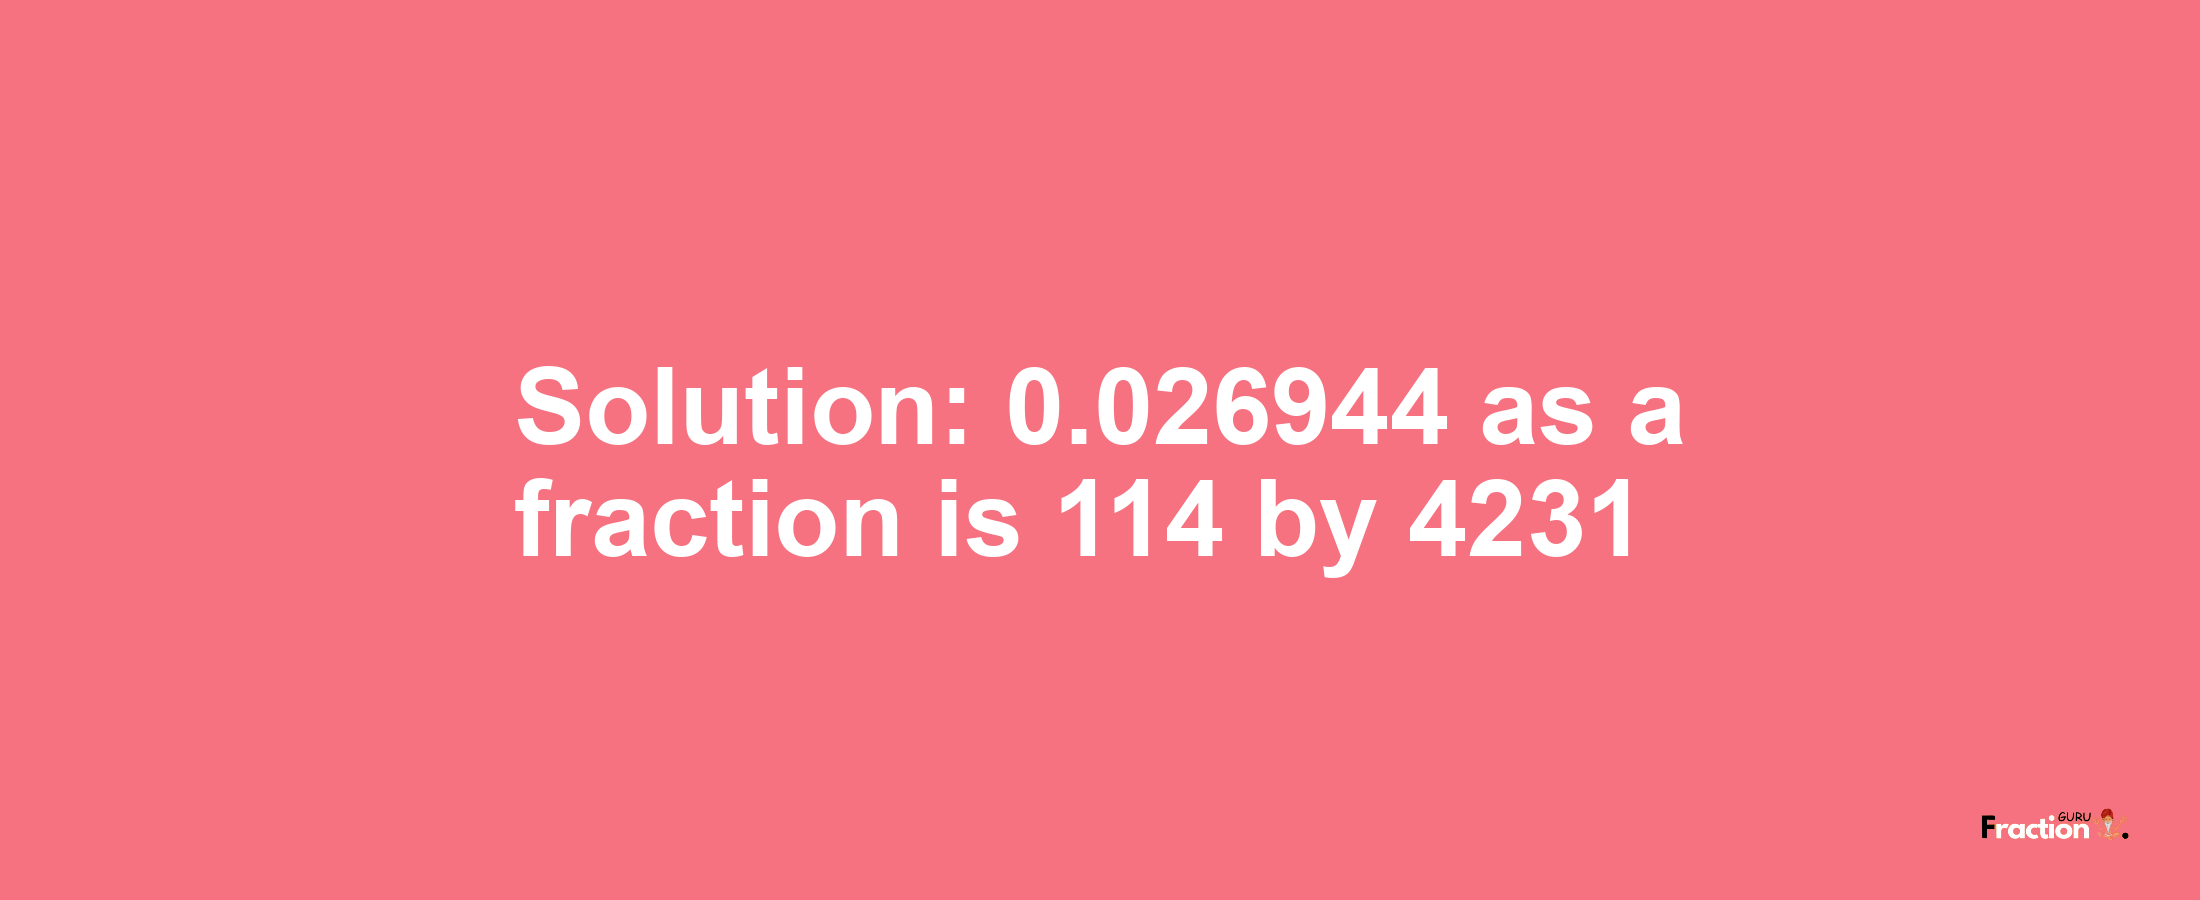 Solution:0.026944 as a fraction is 114/4231